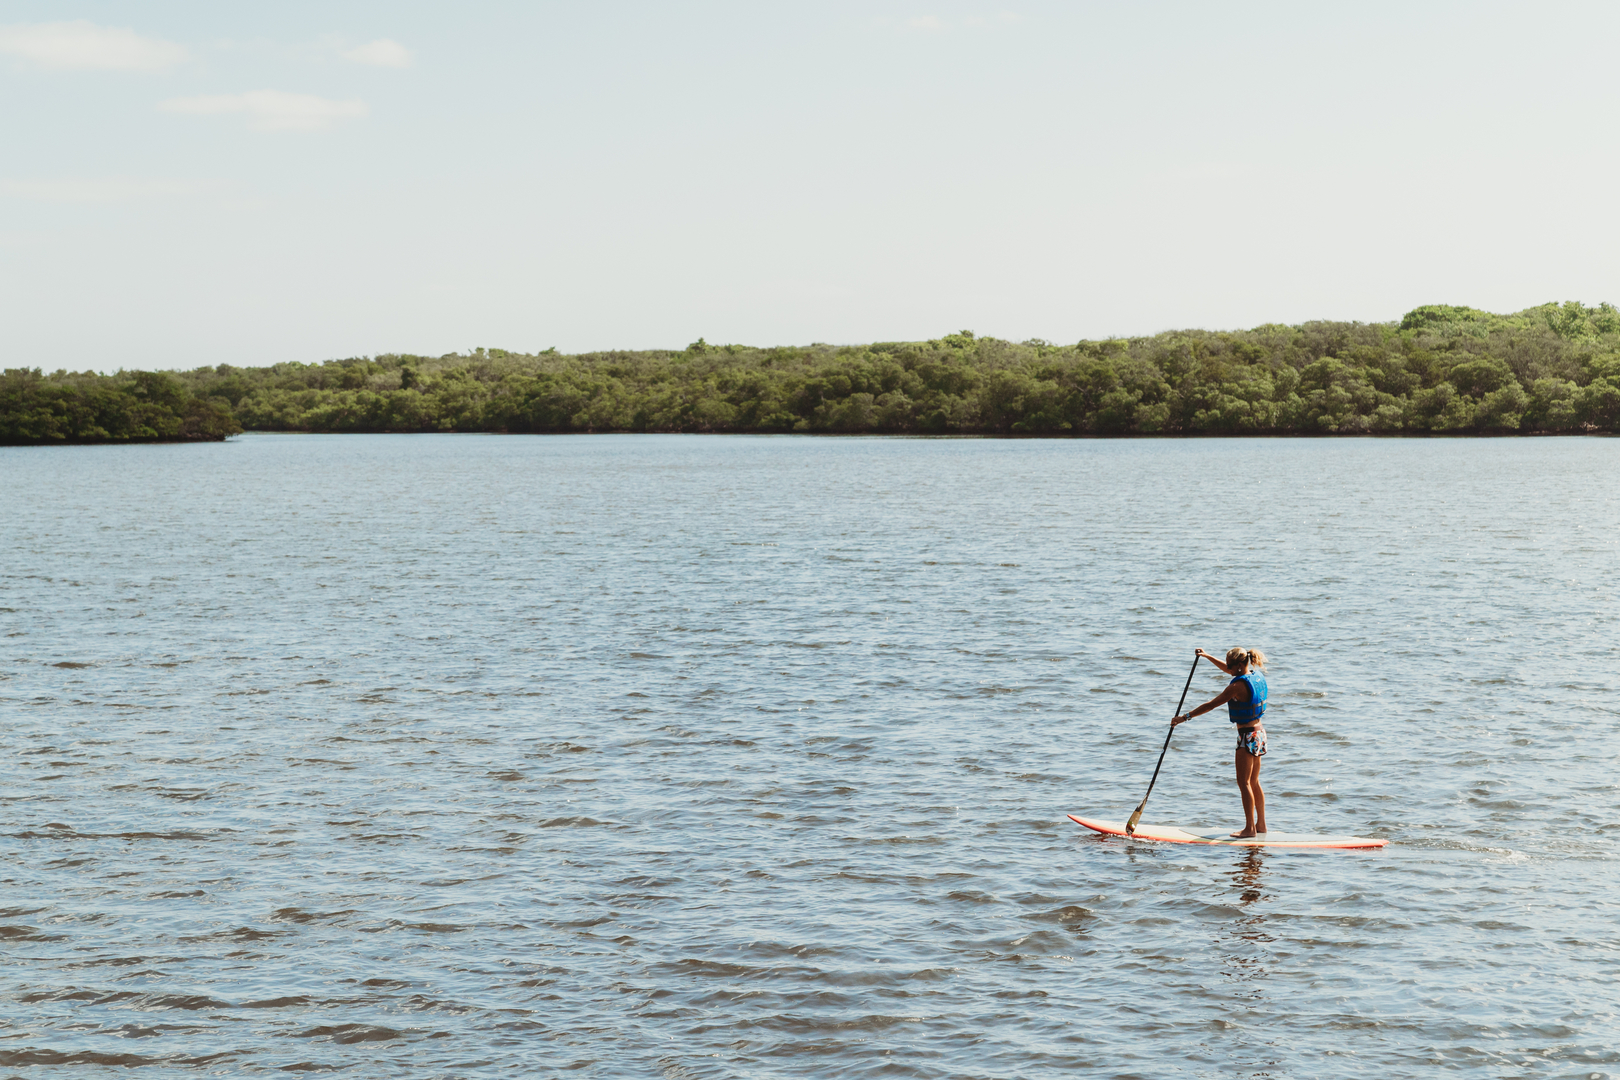 Paddleboarding on the water